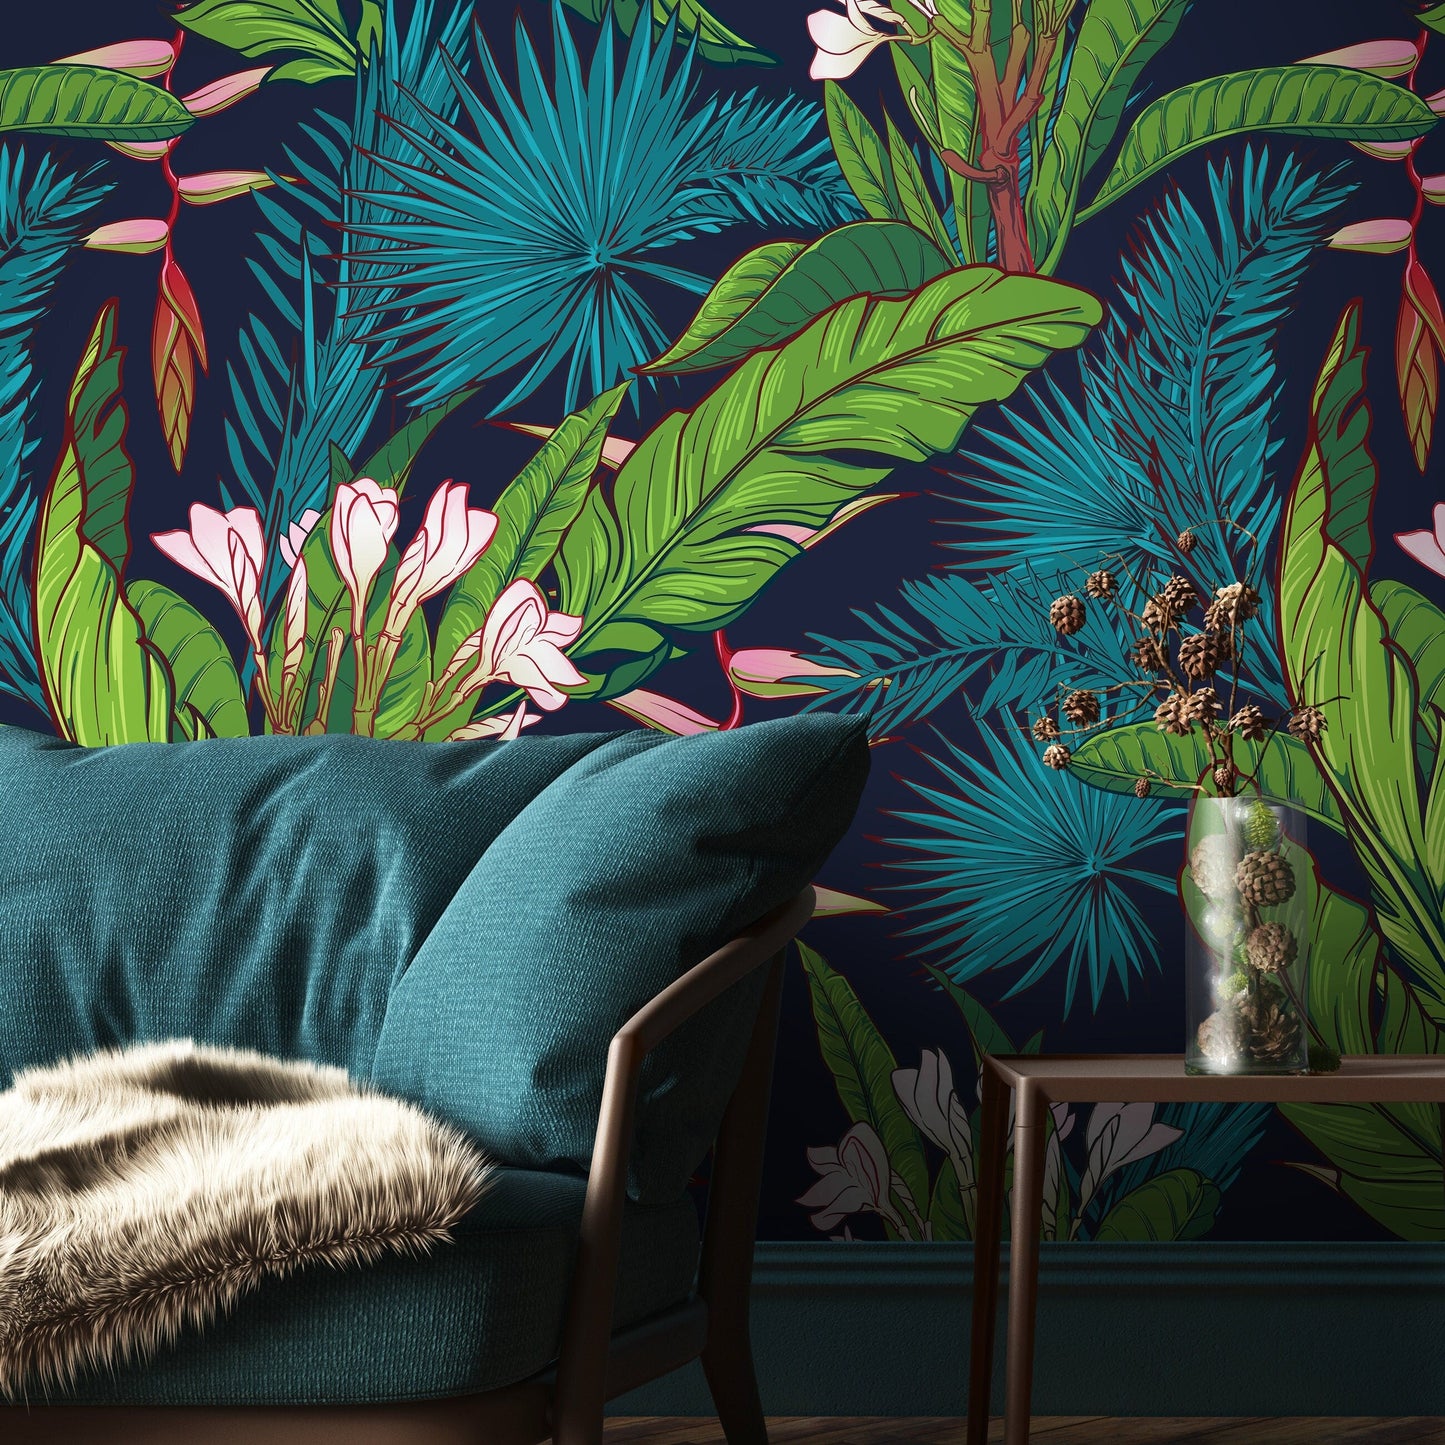 Removable Wallpaper Peel and Stick Wallpaper Wall Paper Wall Mural - Tropical Wallpaper - A469